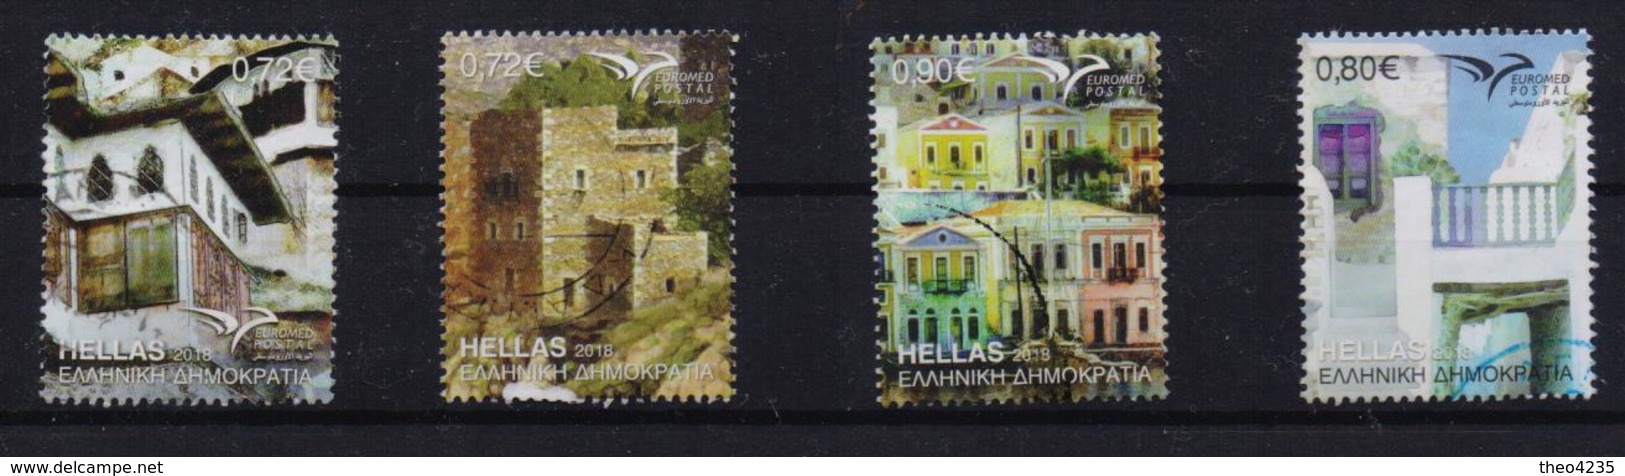 GREECE STAMPS 2018 MEDITERANEAN TRADITIONAL HOUSES(3pcs)-  20/7/18-USED-COMPLETE SET - Usati